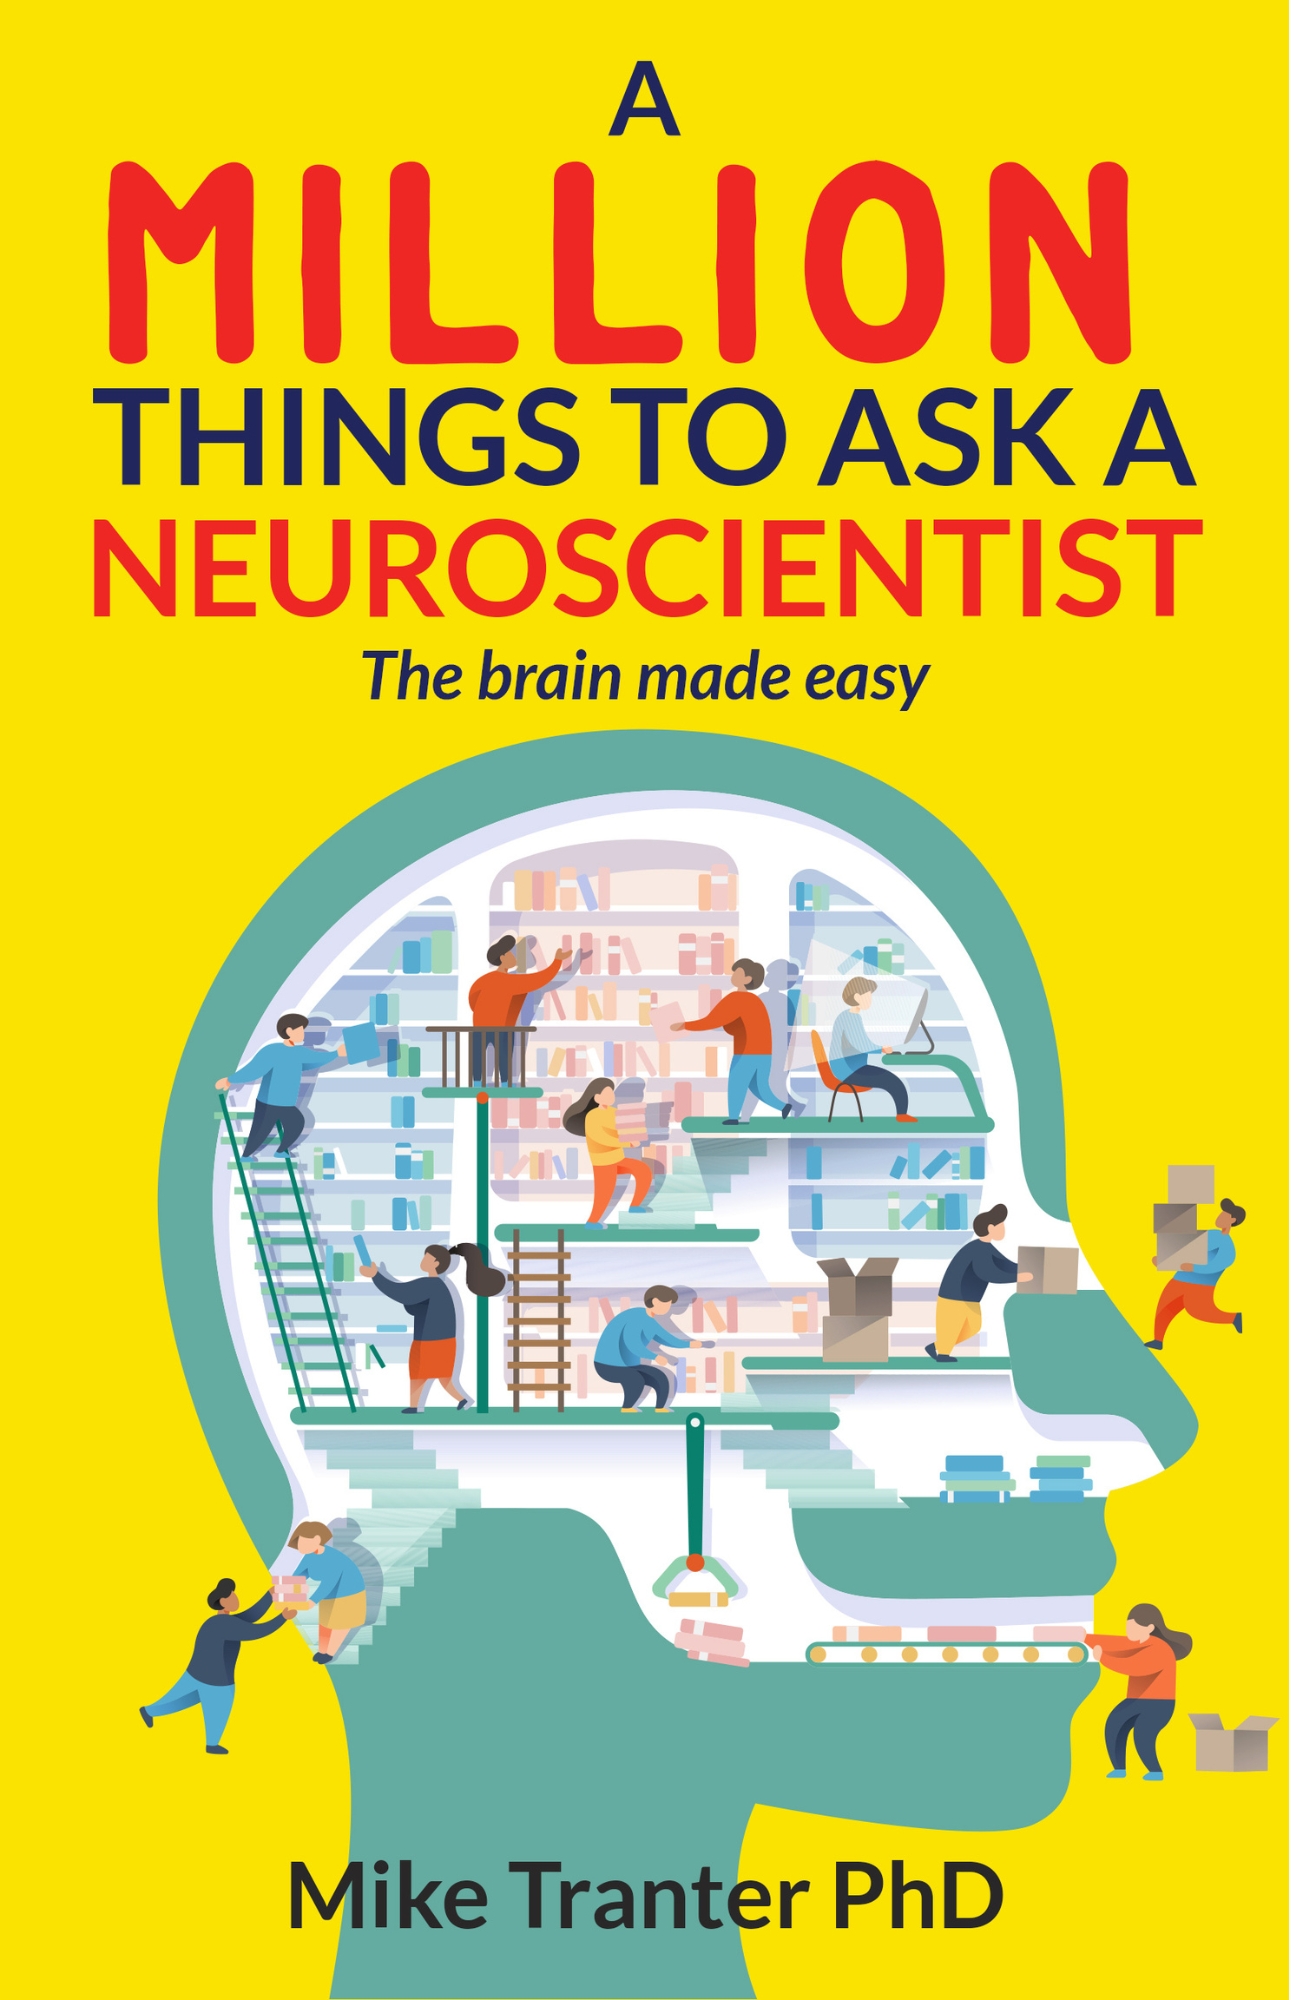 A Million Things To Ask A Neuroscientist